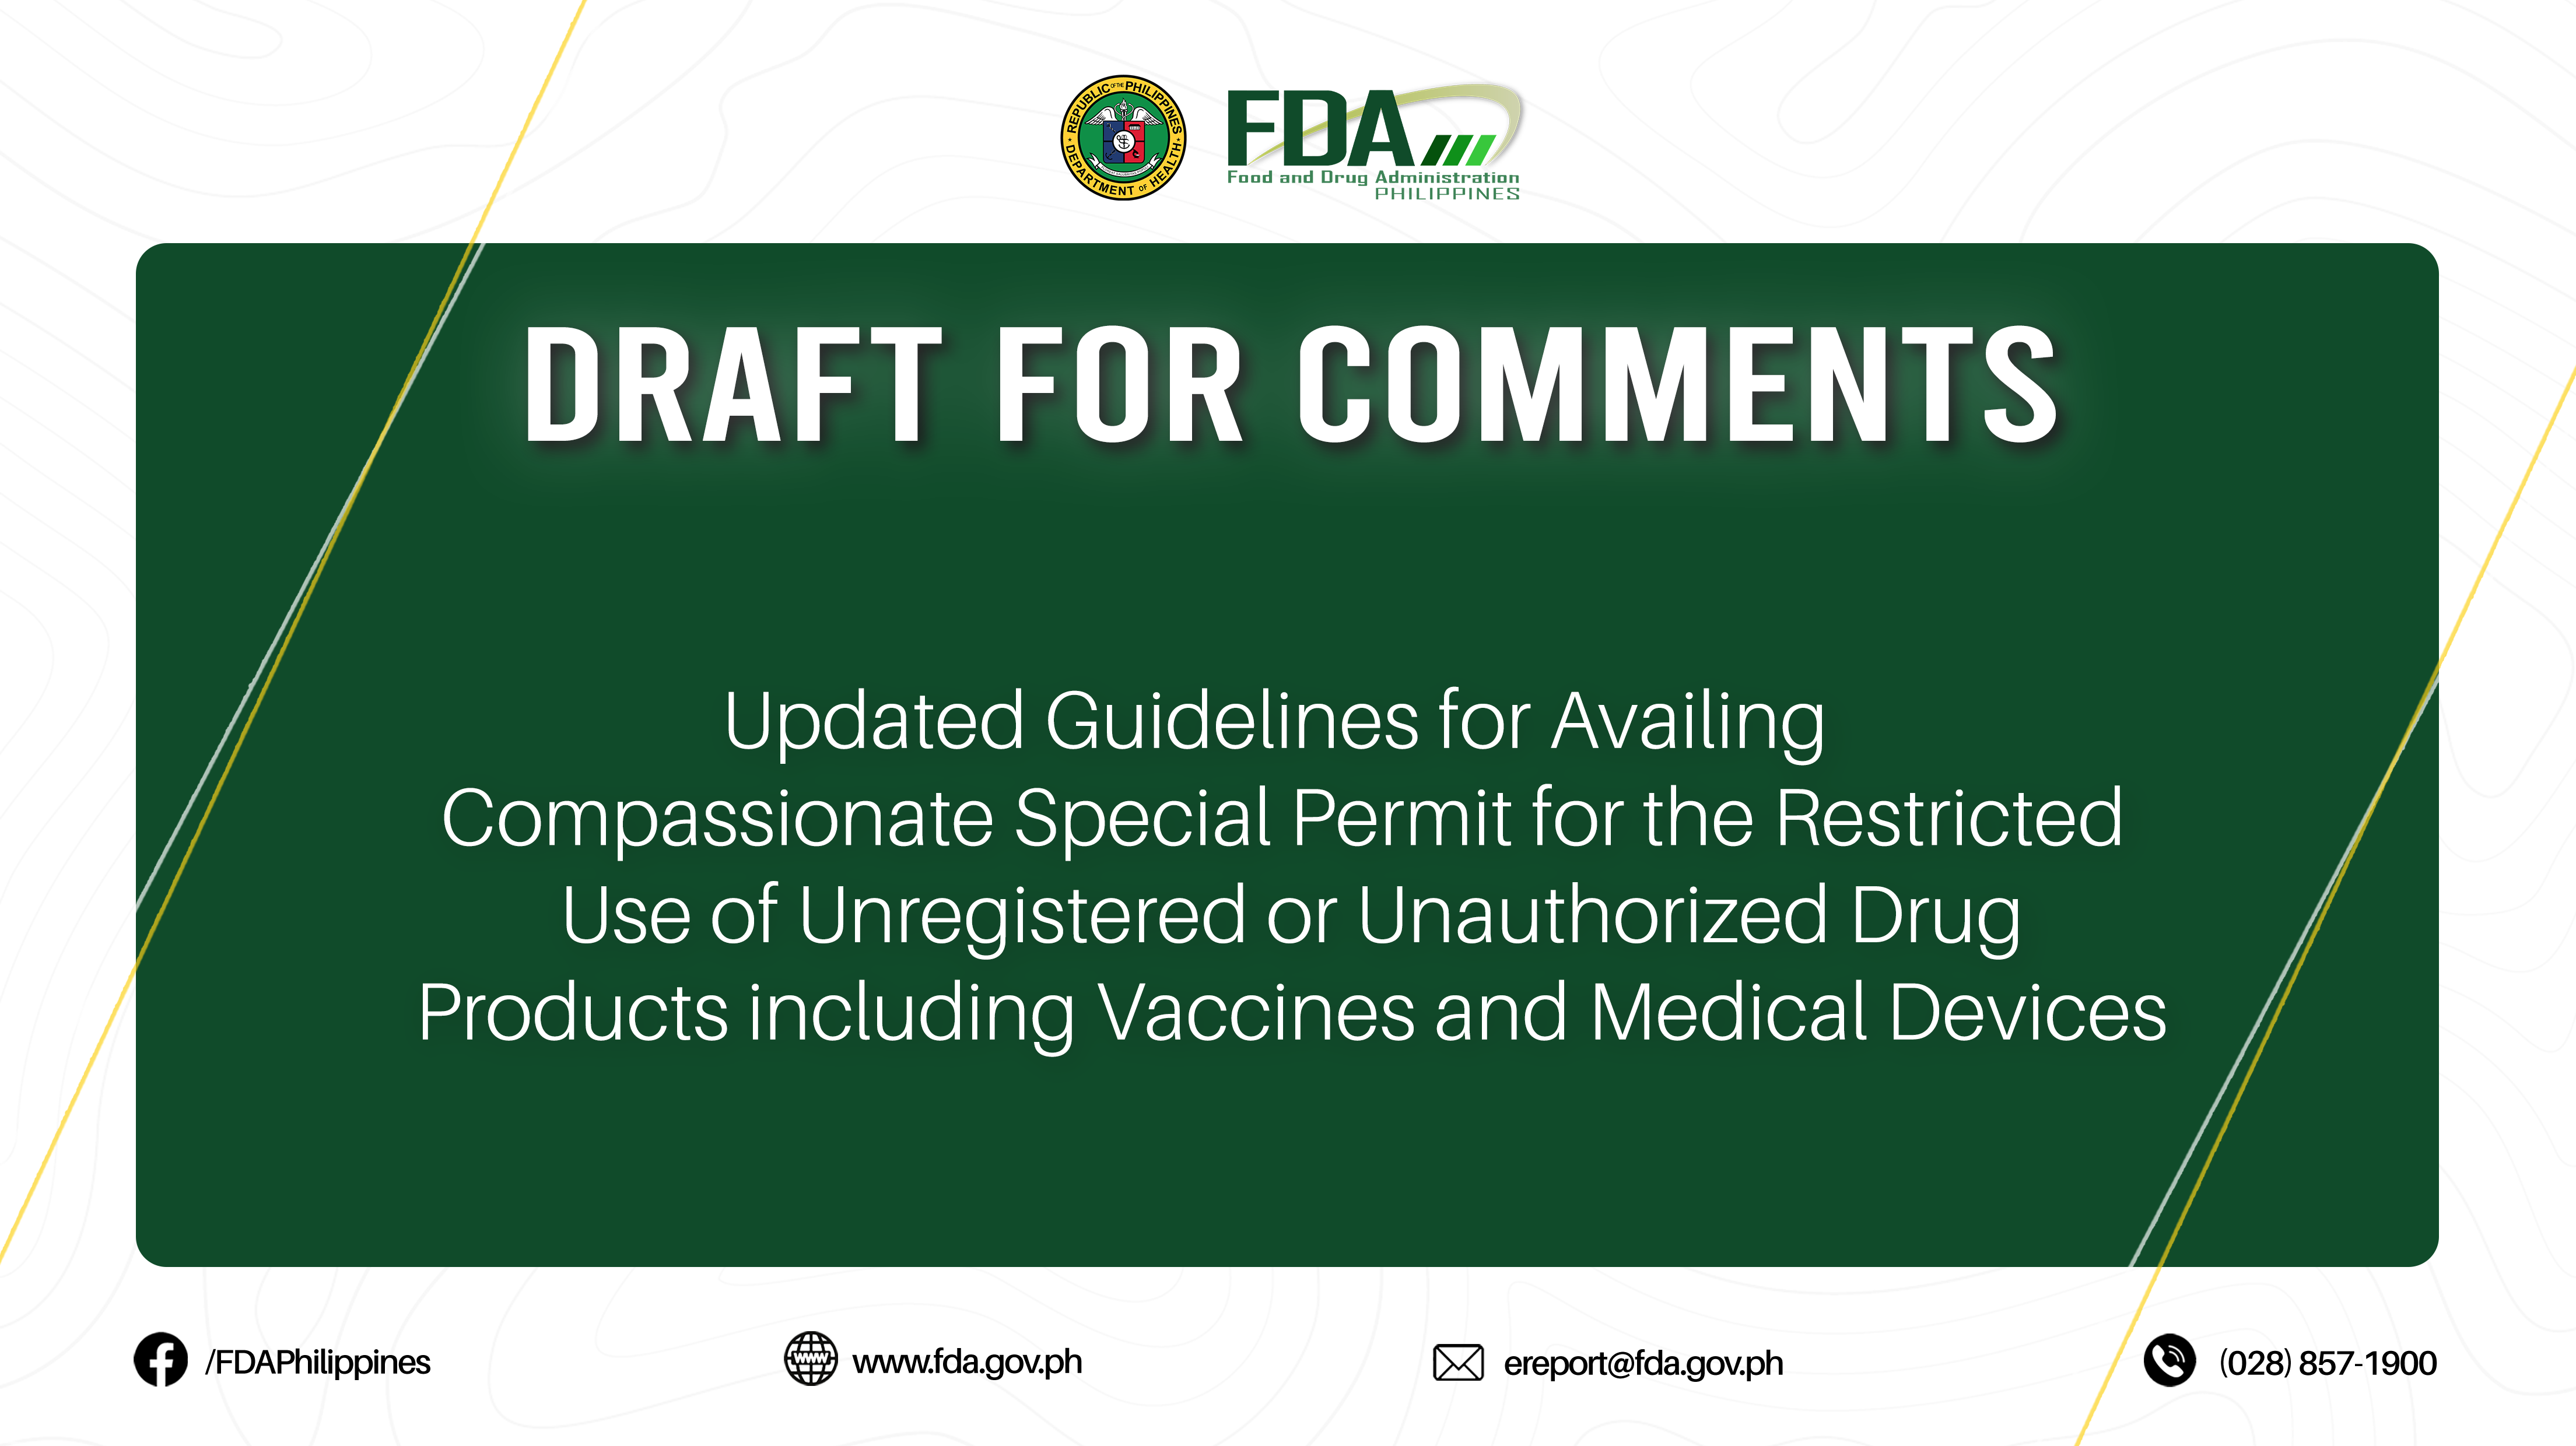 Draft for Comments || Updated Guidelines for Availing Compassionate Special Permit for the Restricted Use of Unregistered or Unauthorized Drug Products including Vaccines and Medical Devices